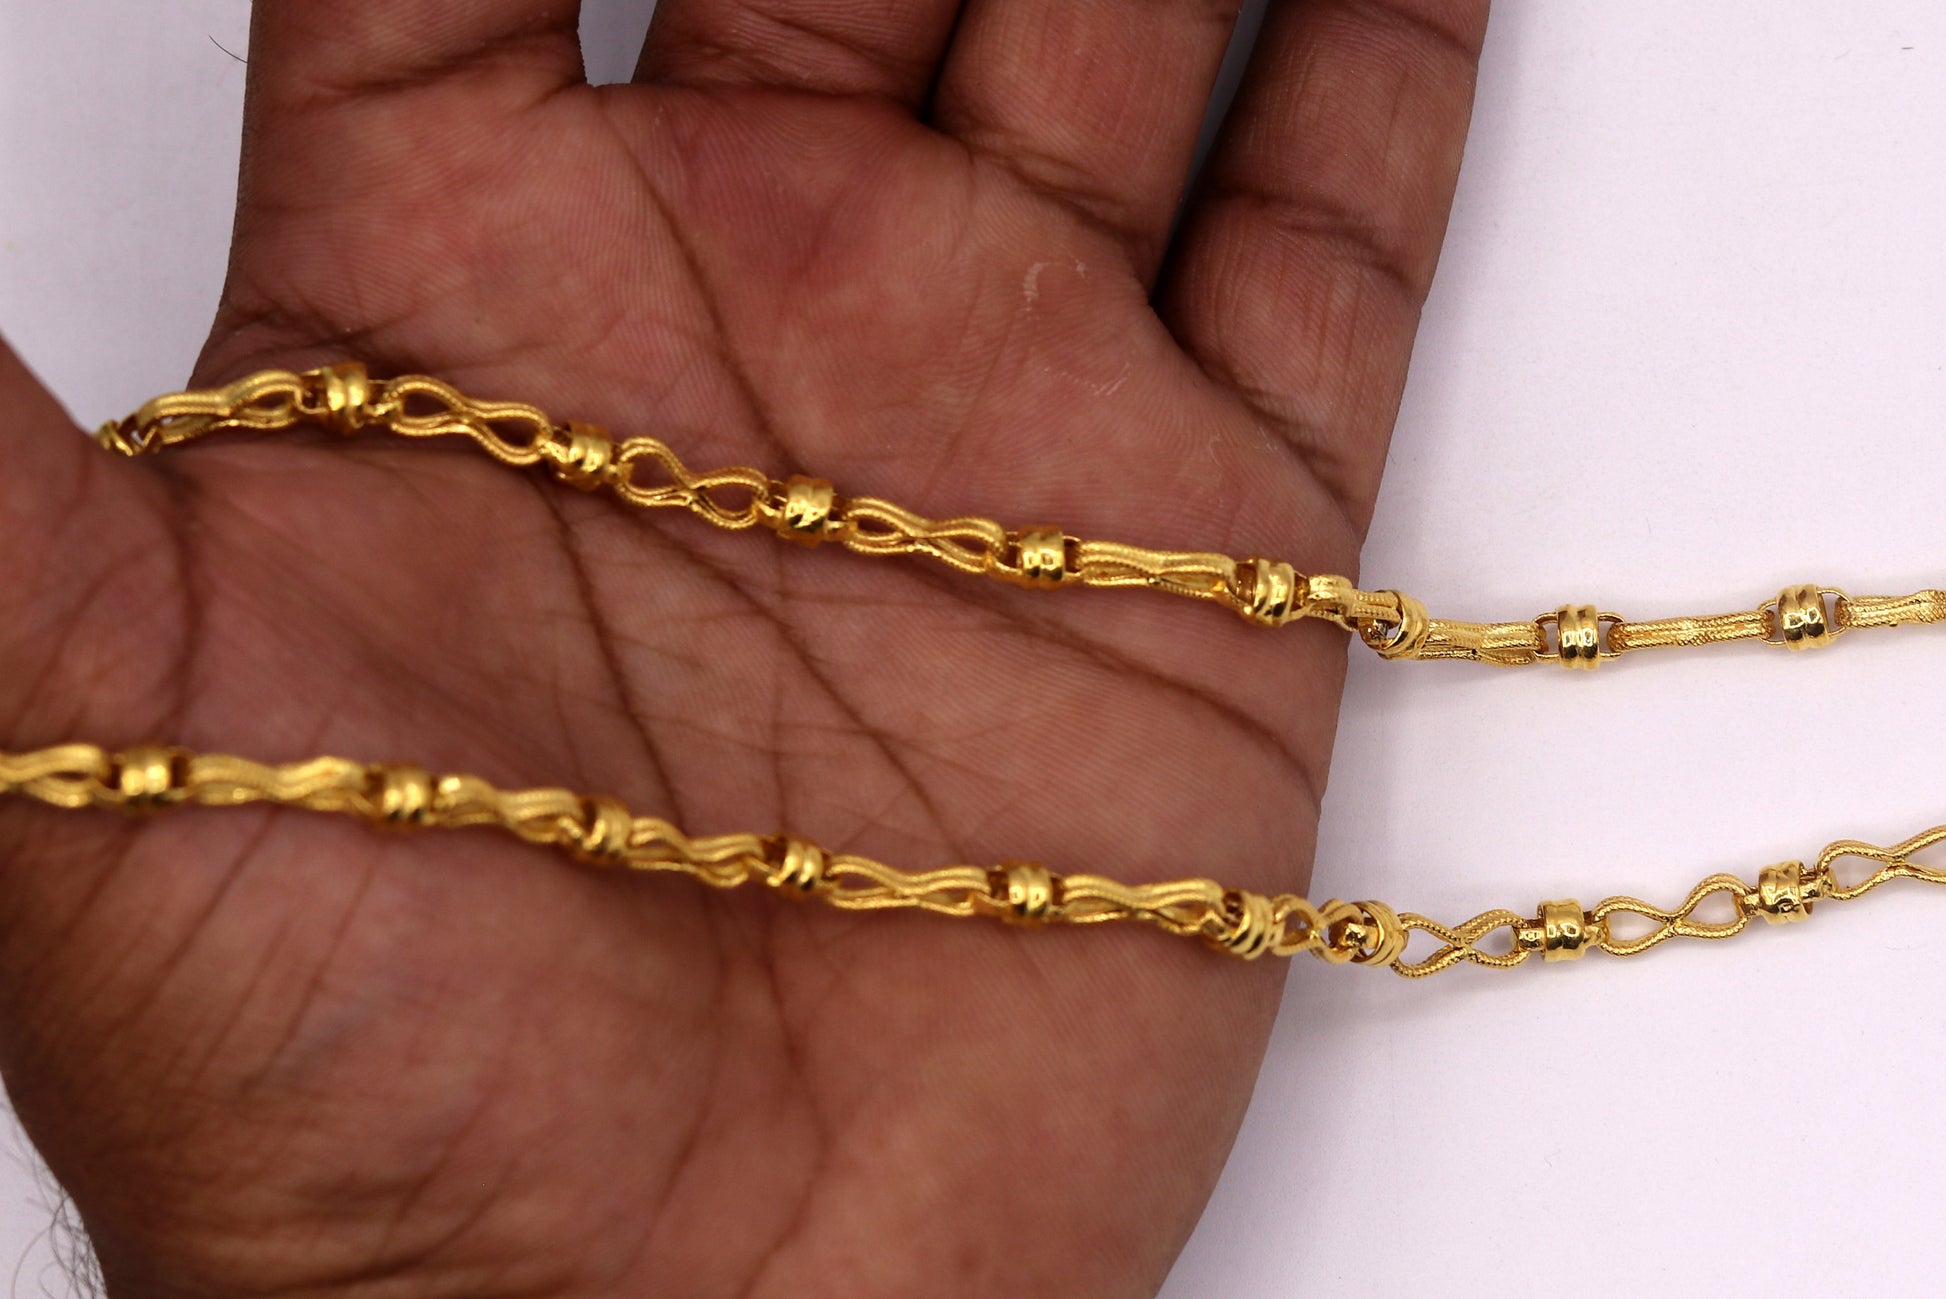 22kt certified hallmarked unique antique design handmade link chain unisex gifting jewelry ch191 - TRIBAL ORNAMENTS